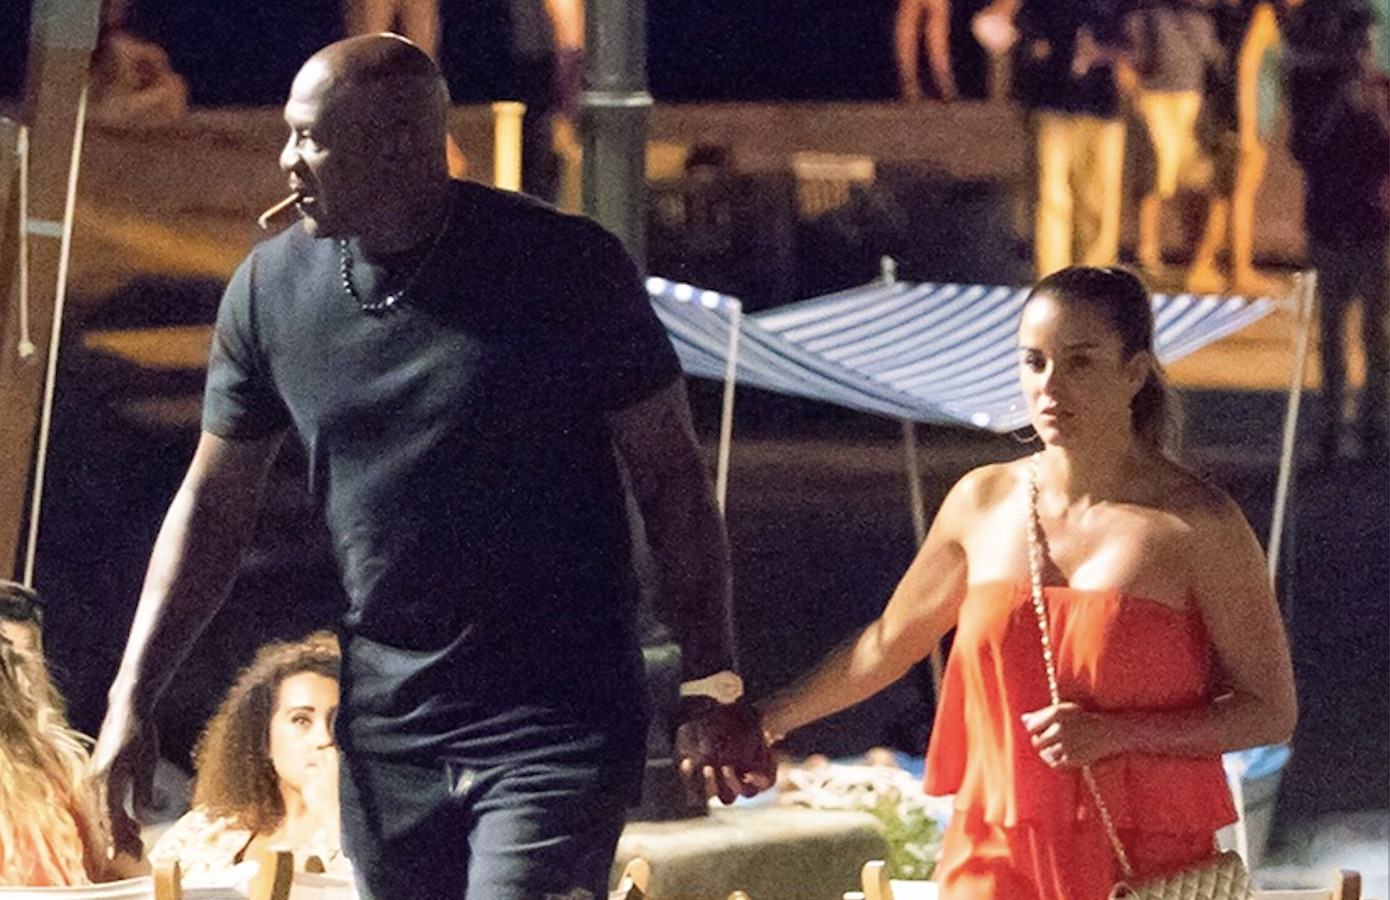 Michael Jordan Spotted out With Wife in Rare Sighting